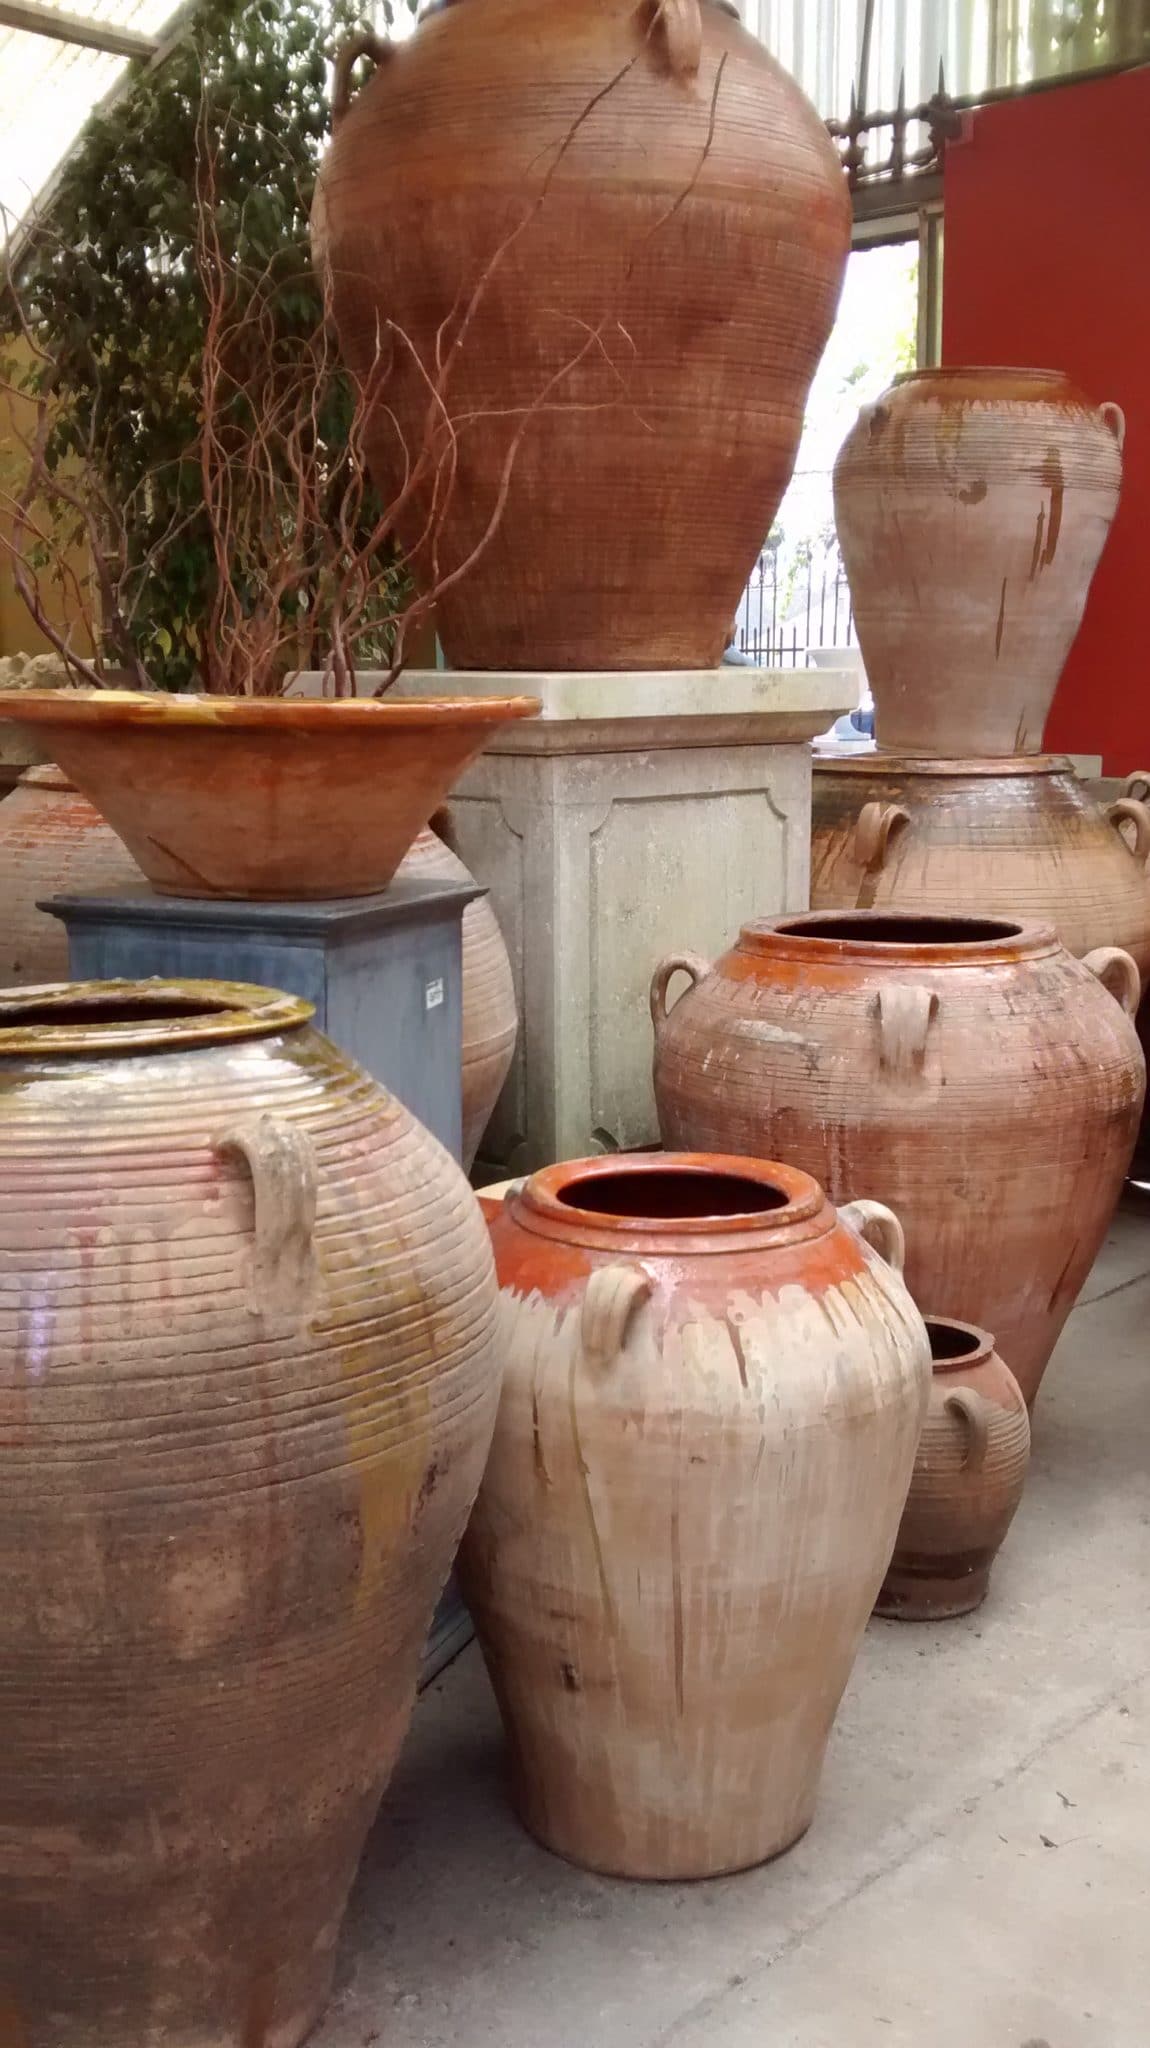 Eye of the Day|Antique Spanish oil jars|terracotta pottery